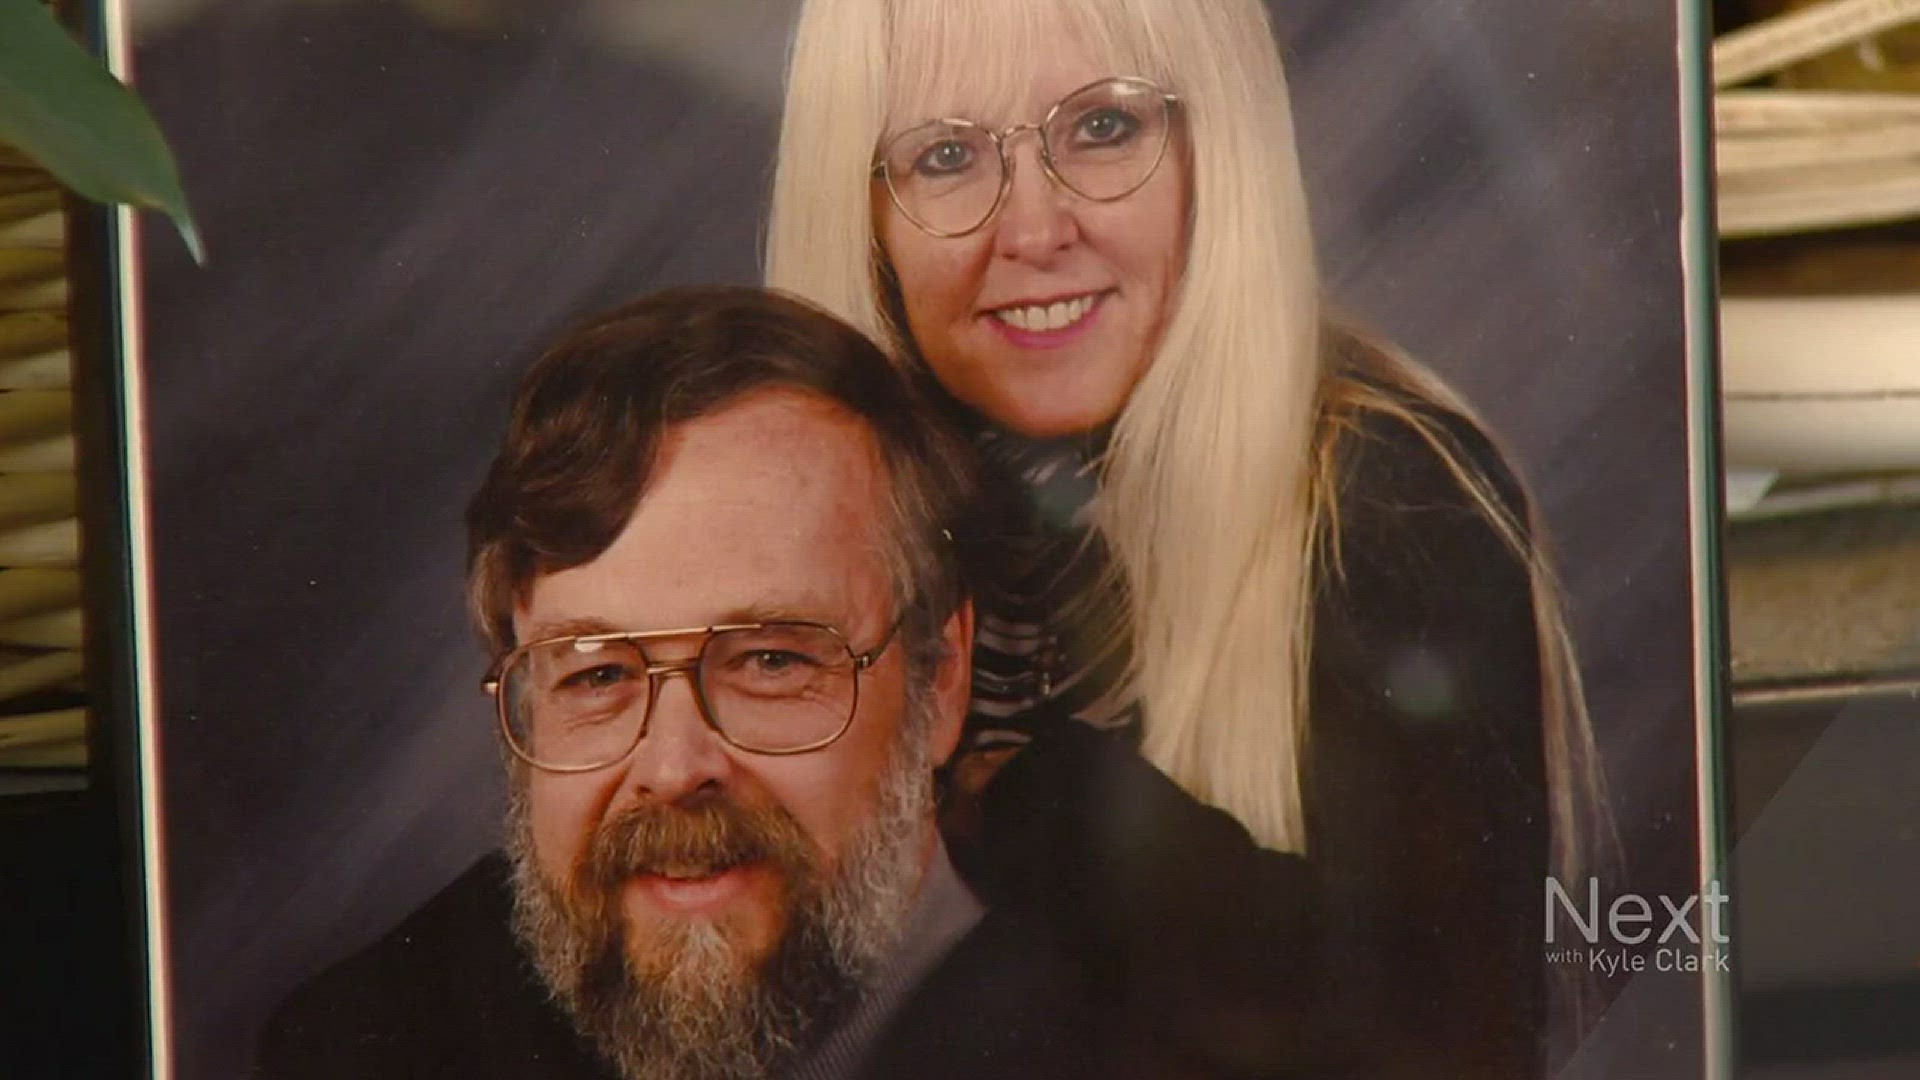 After Colorado legalized physician-assisted suicide, Kathy and her husband immediately began searching for the prescription that would end her life.